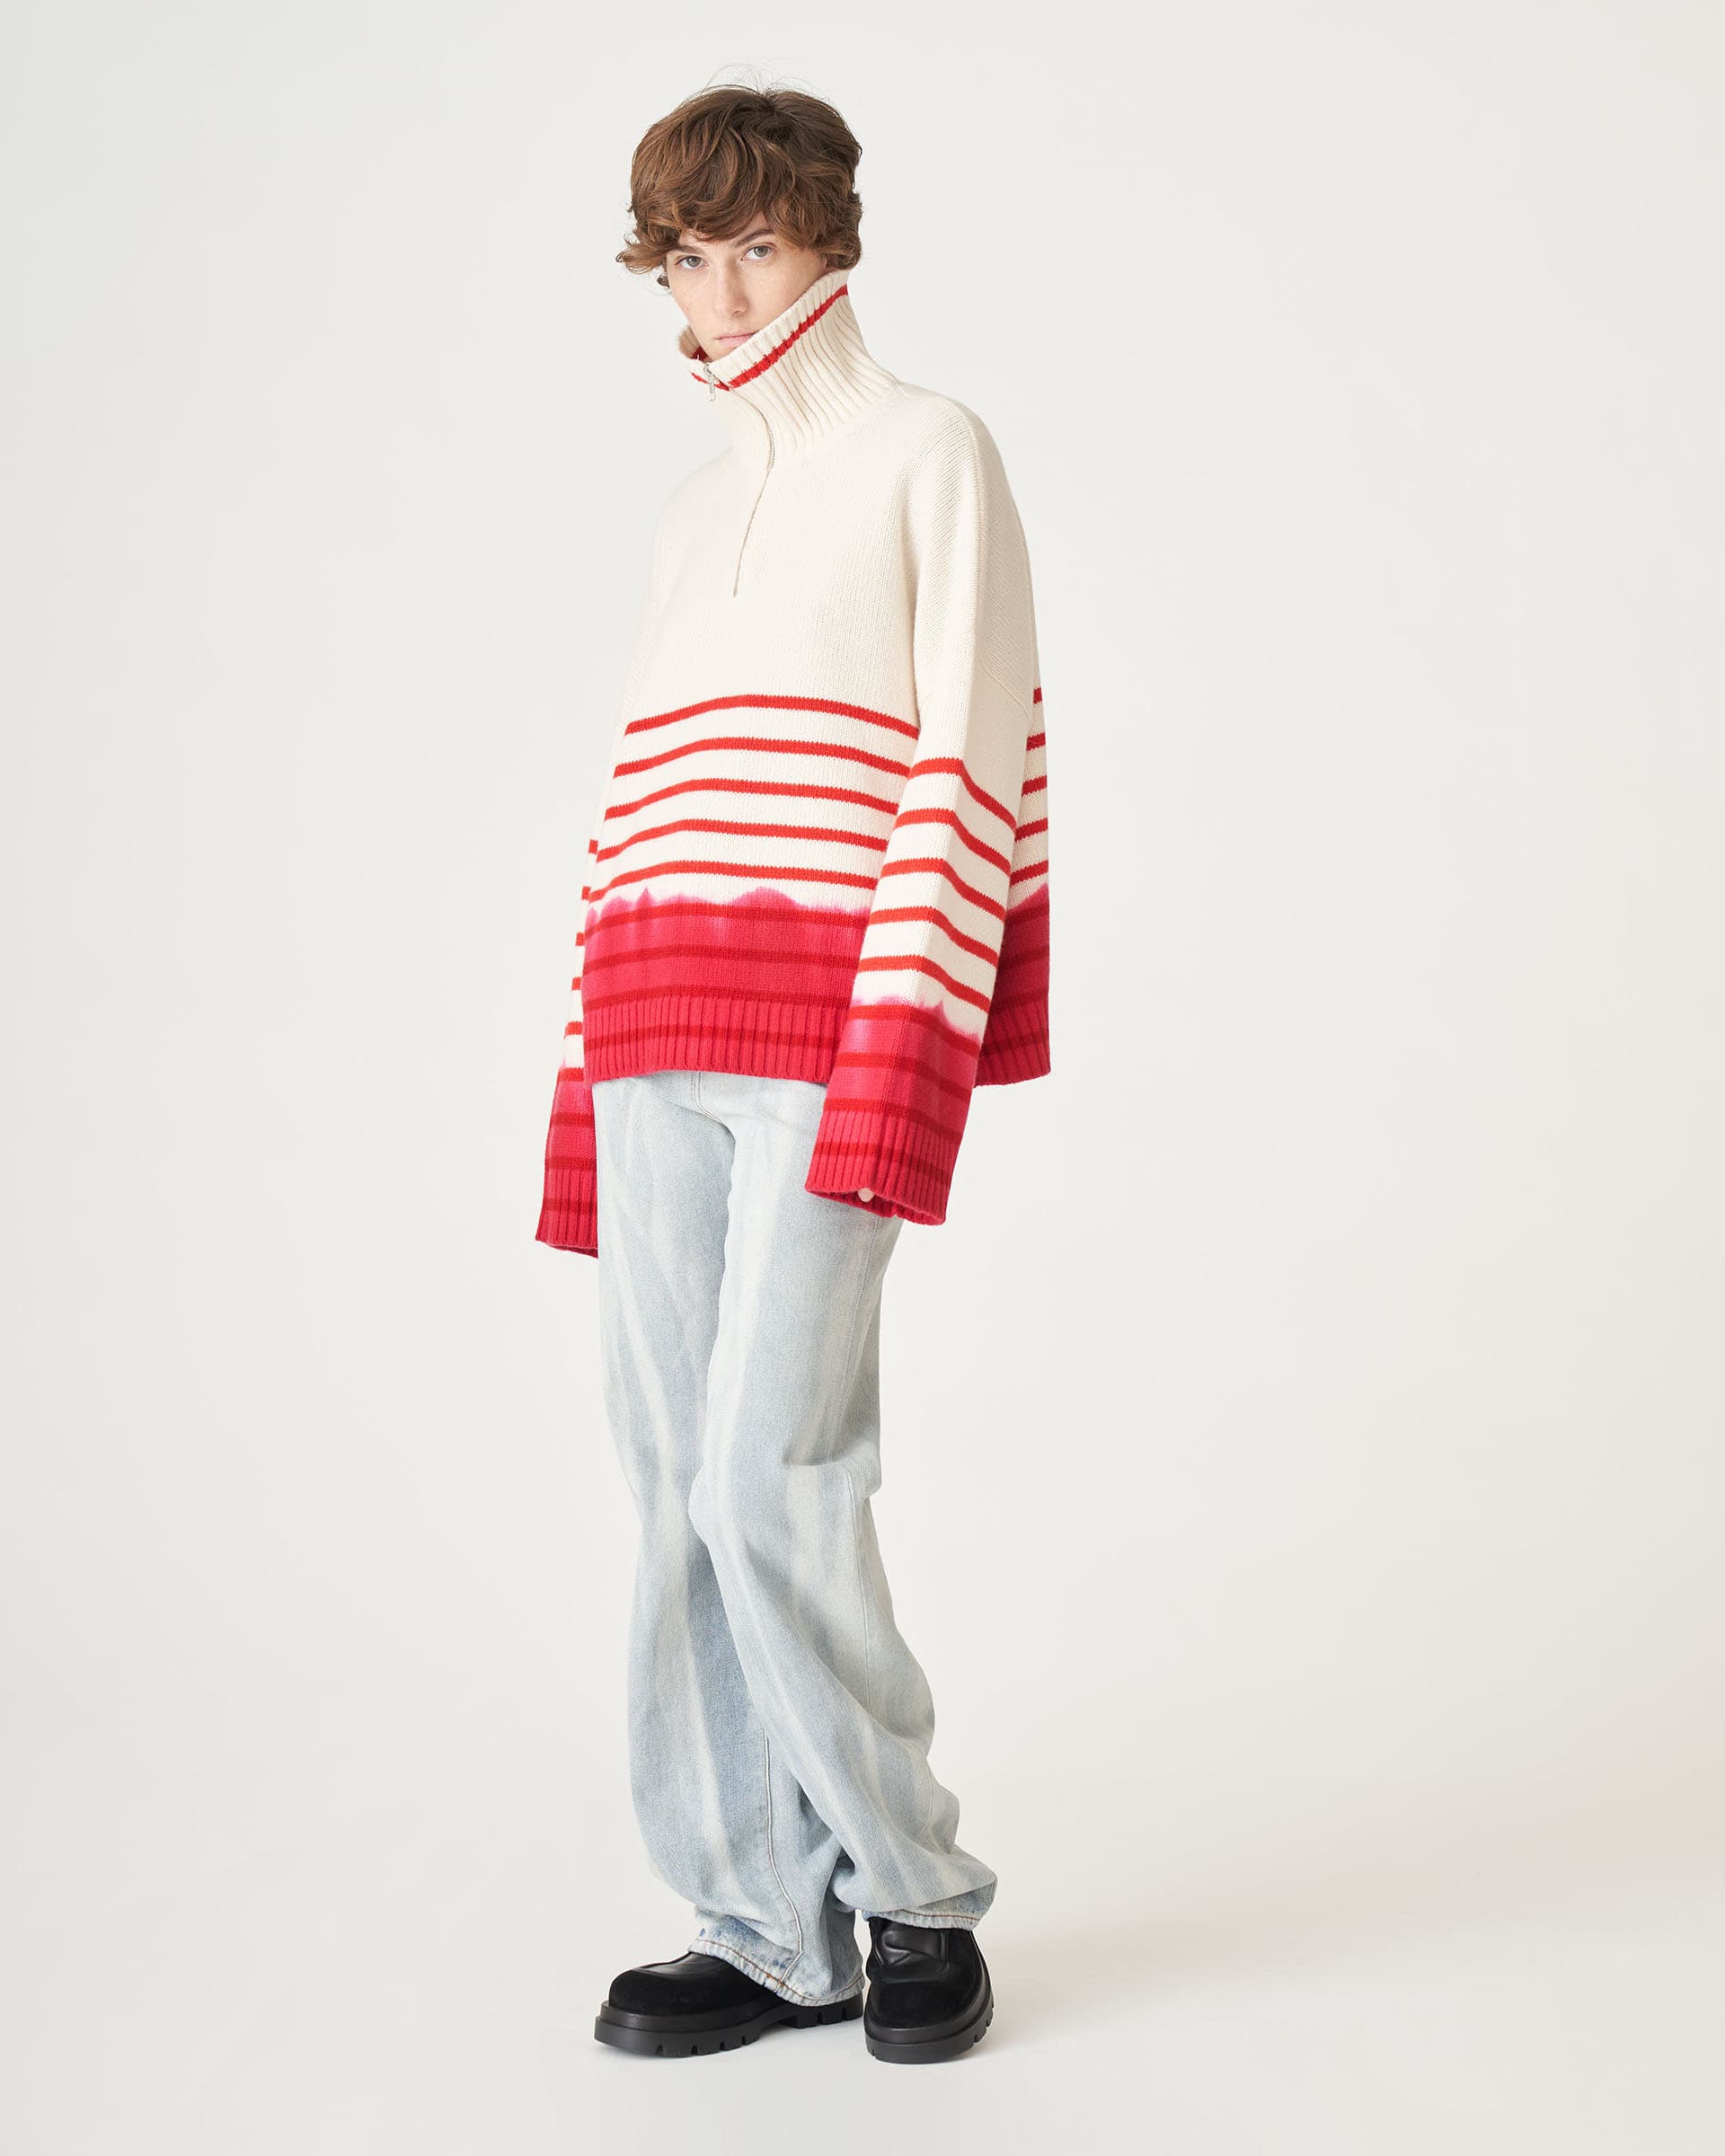 The Market Store | Over Striped Sweater With Dirt